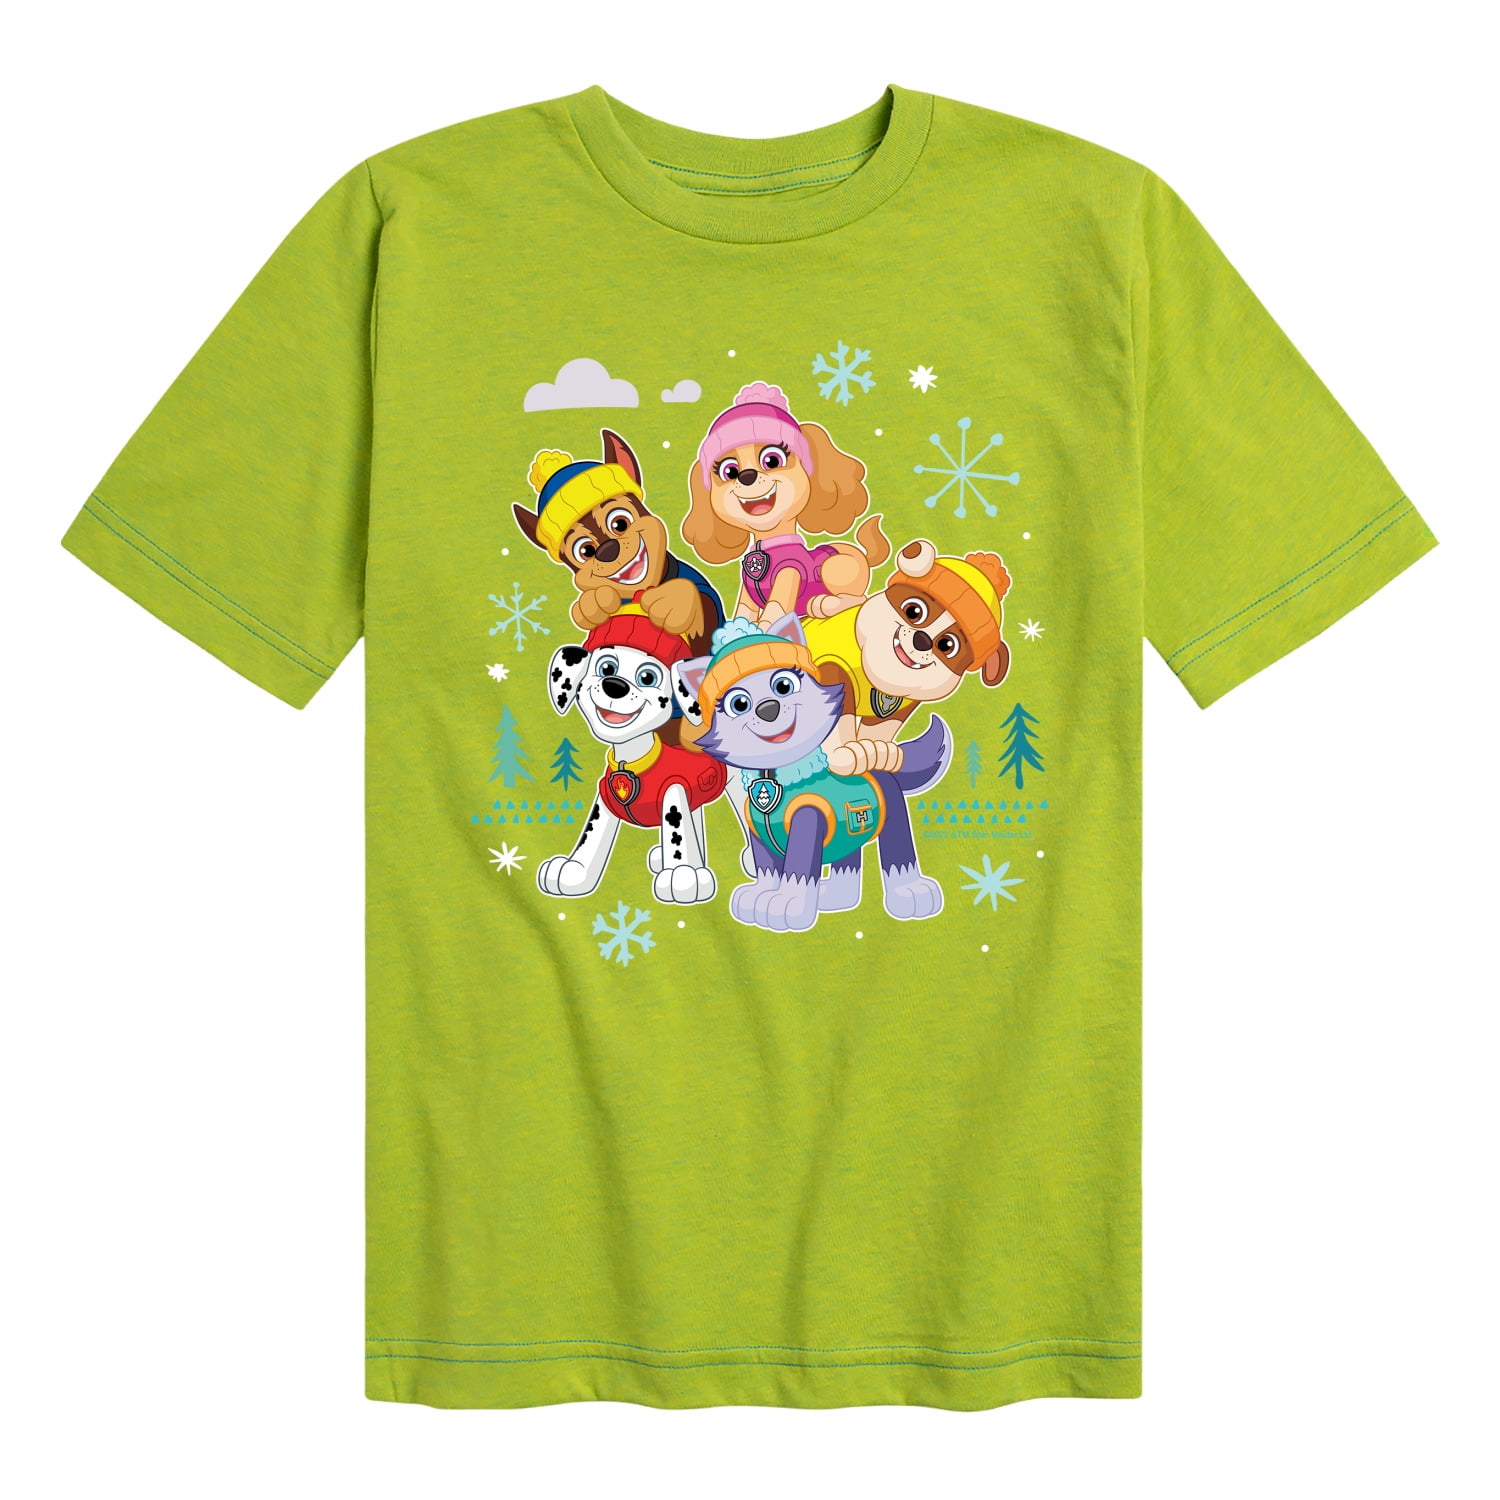 Short - T-Shirt Graphic And Paw Patrol With Youth Group Toddler Icons Sleeve Paw - Patrol